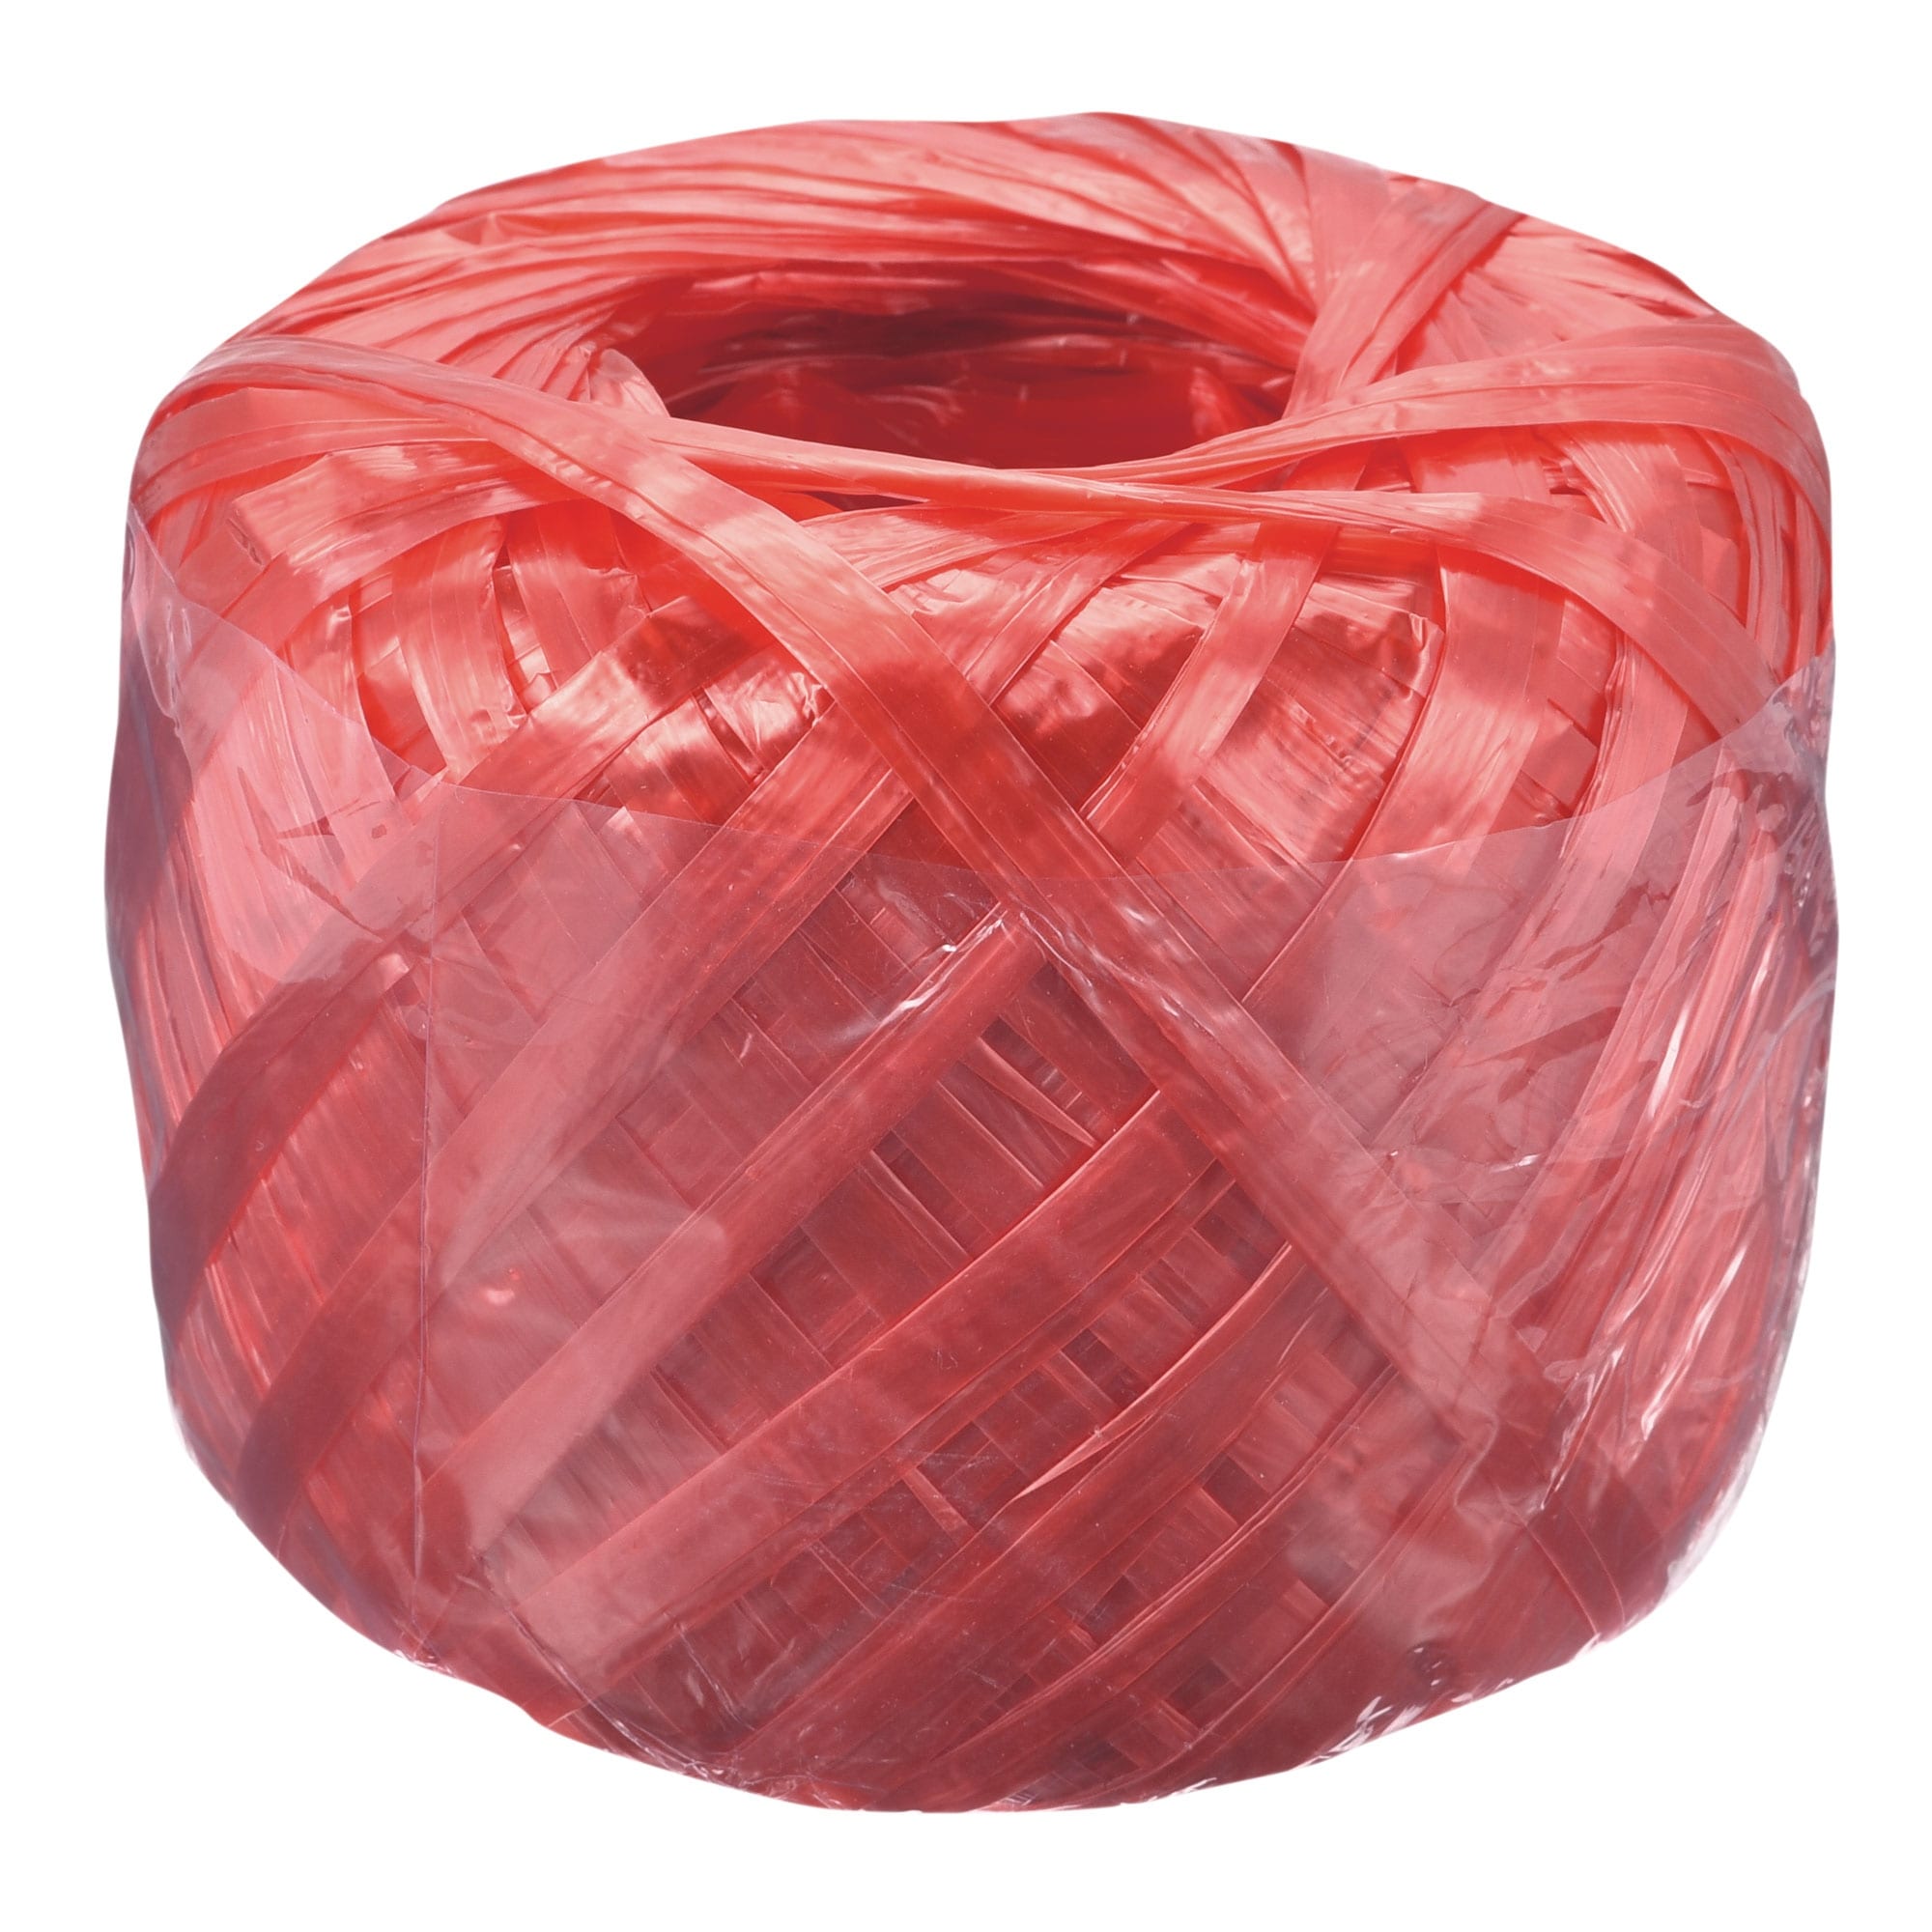 https://ak1.ostkcdn.com/images/products/is/images/direct/3fa5272d378e08cfdba755e29d4c943e2ef406dc/Polyester-Nylon-Plastic-Rope-Twine-Household-Bundled-for-Packing-Garde.jpg